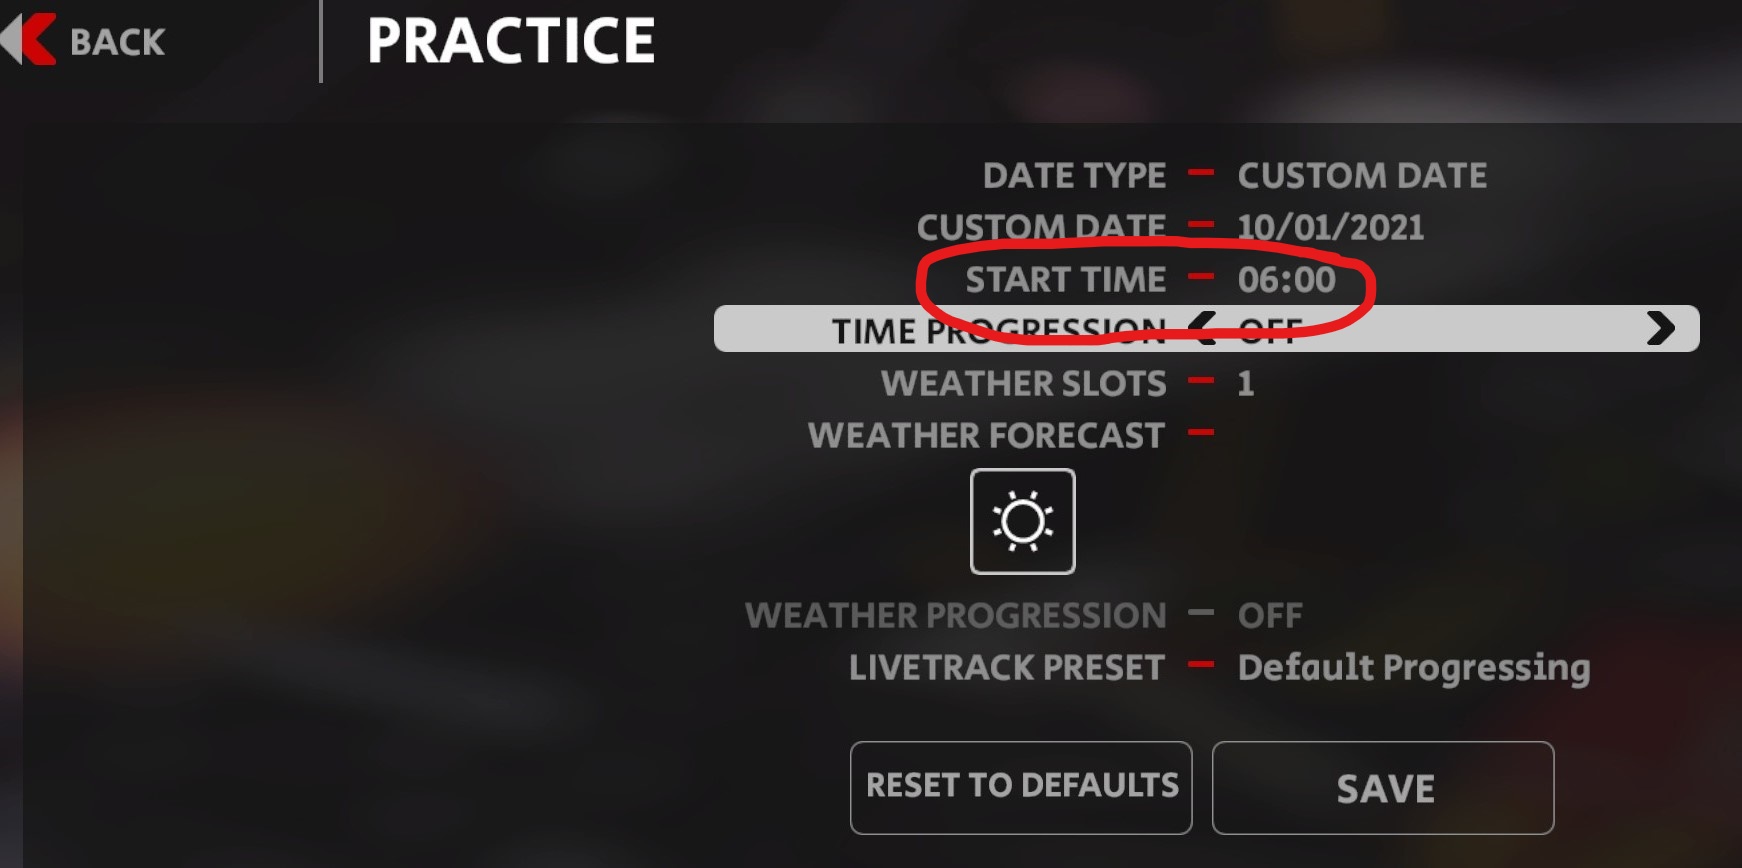 Allow minutes as input for start time.jpg